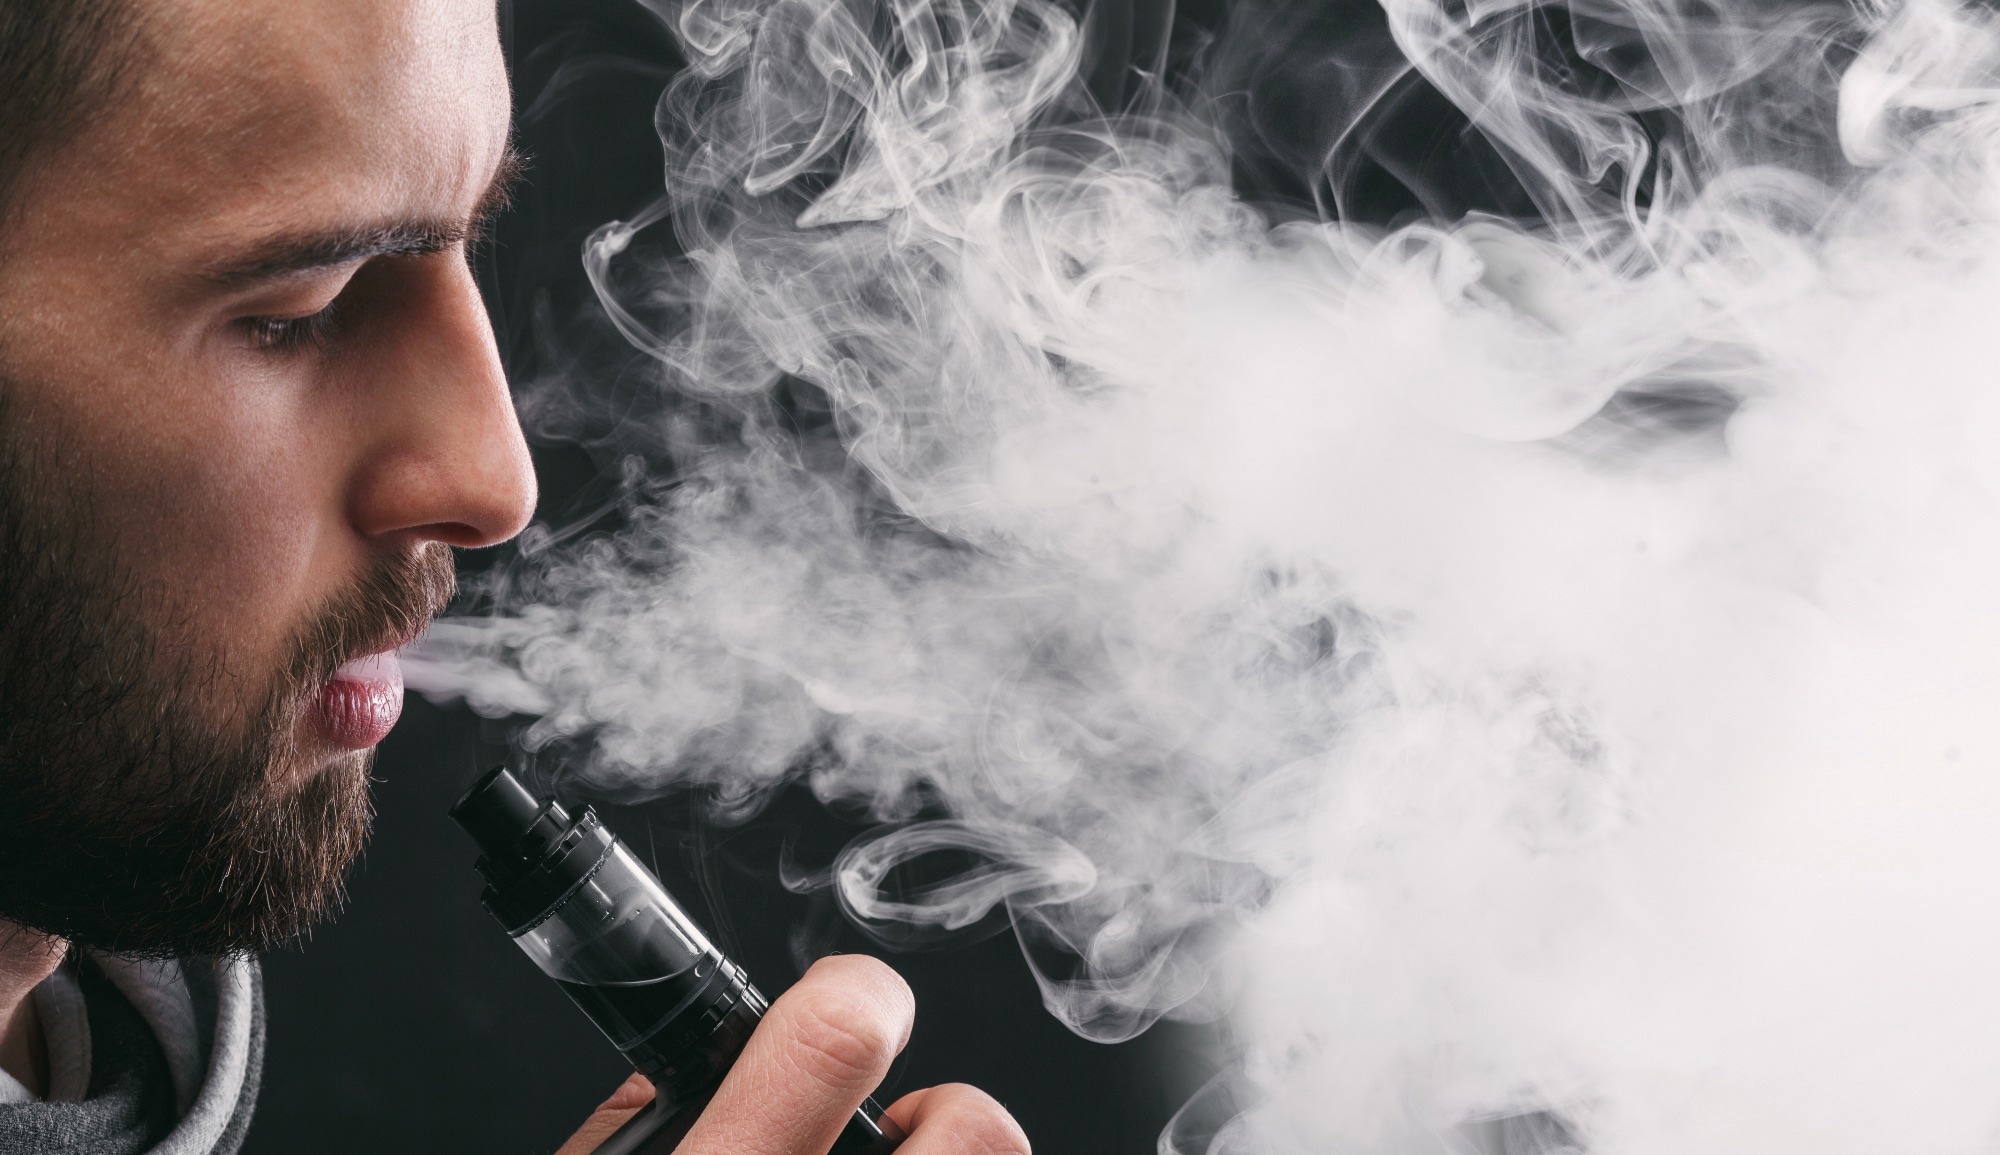 Study: Association between Second-Hand Exposure to E-Cigarettes at Home and Exacerbations in Children with Asthma. Image Credit: Prostock-studio / Shutterstock